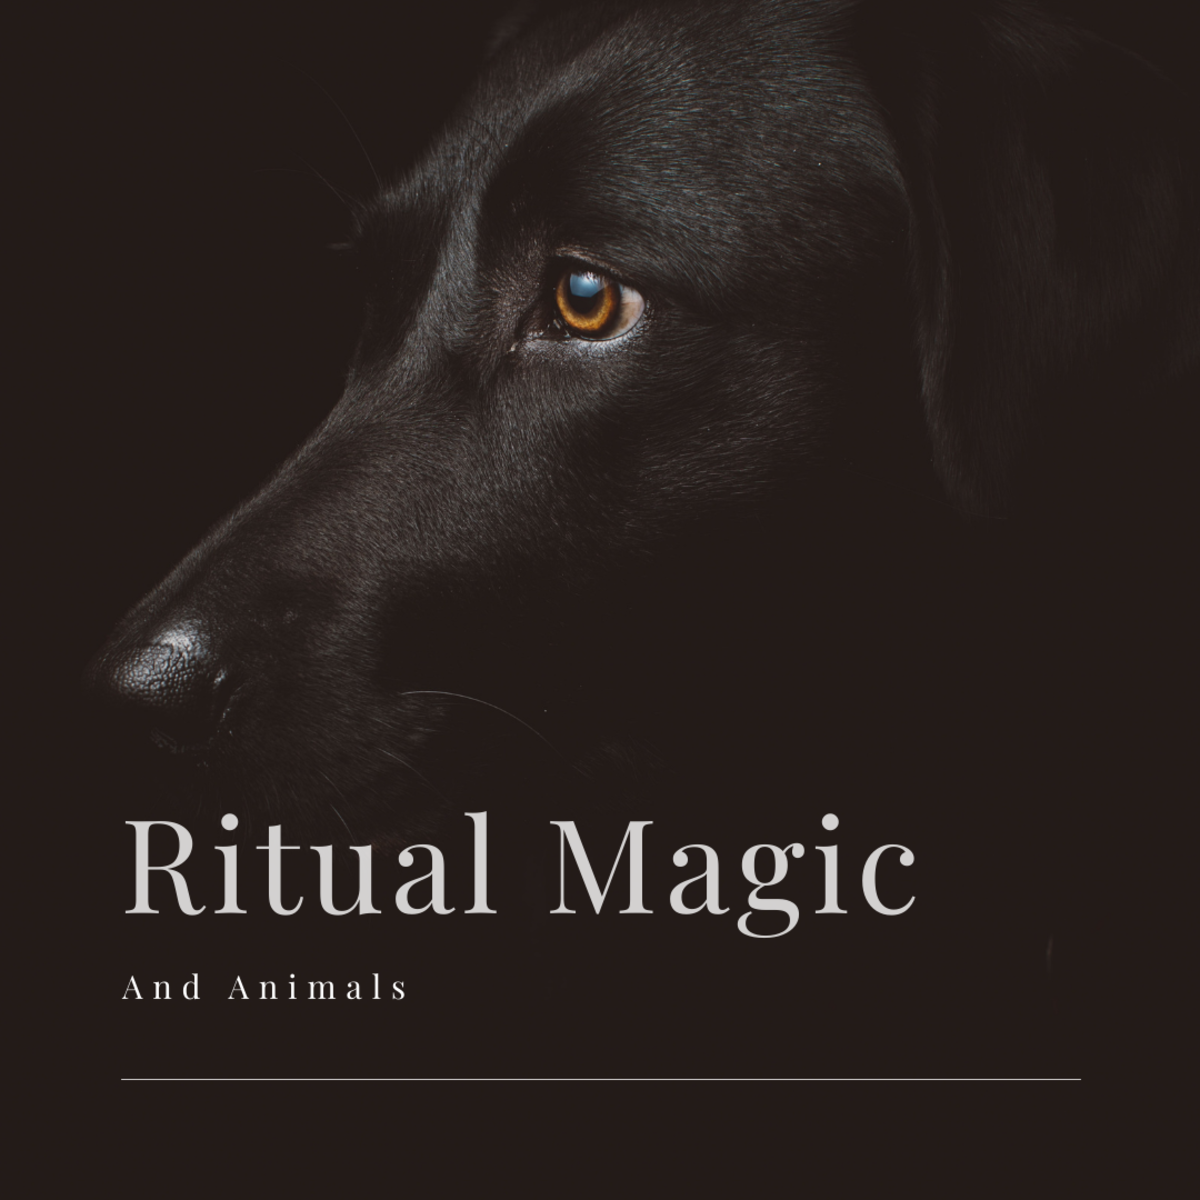 Magical Spells for Protecting and Connecting With Animals